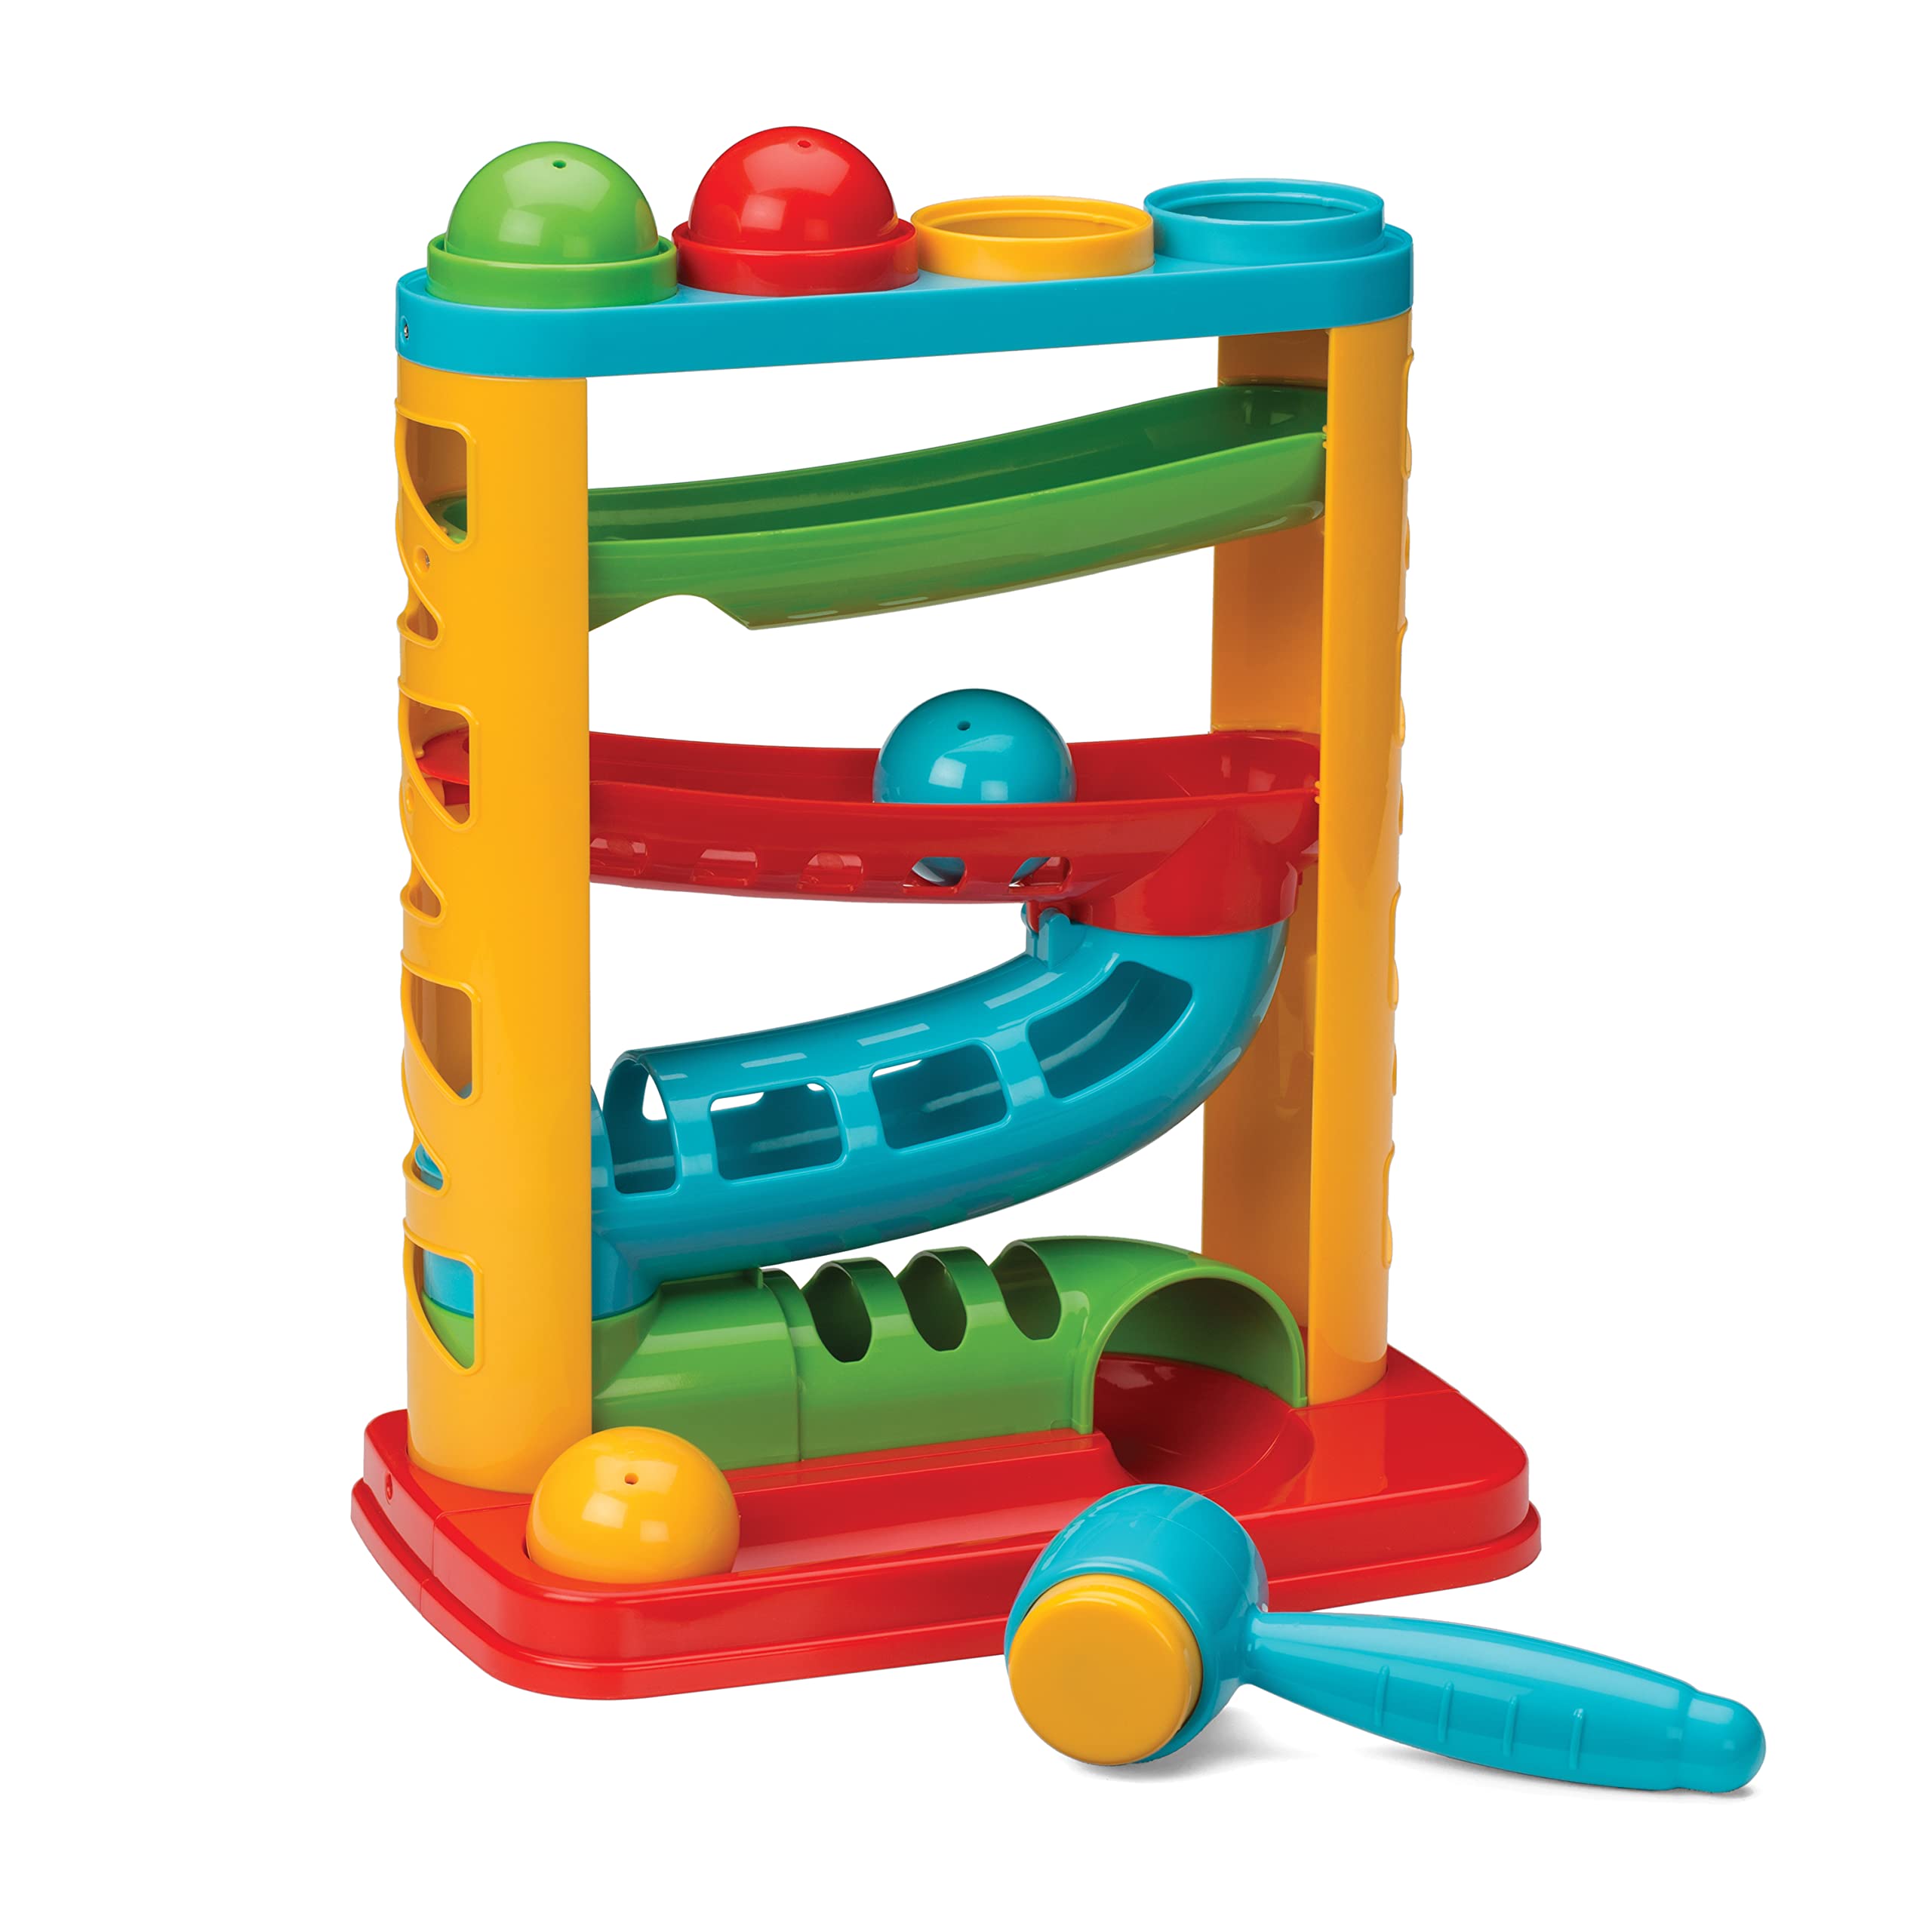 Infantino Bop & Drop Ball Tower - STEAM Educational Play, Hand-Eye Coordination Skills, and Cause and Effect Play for Babies & T